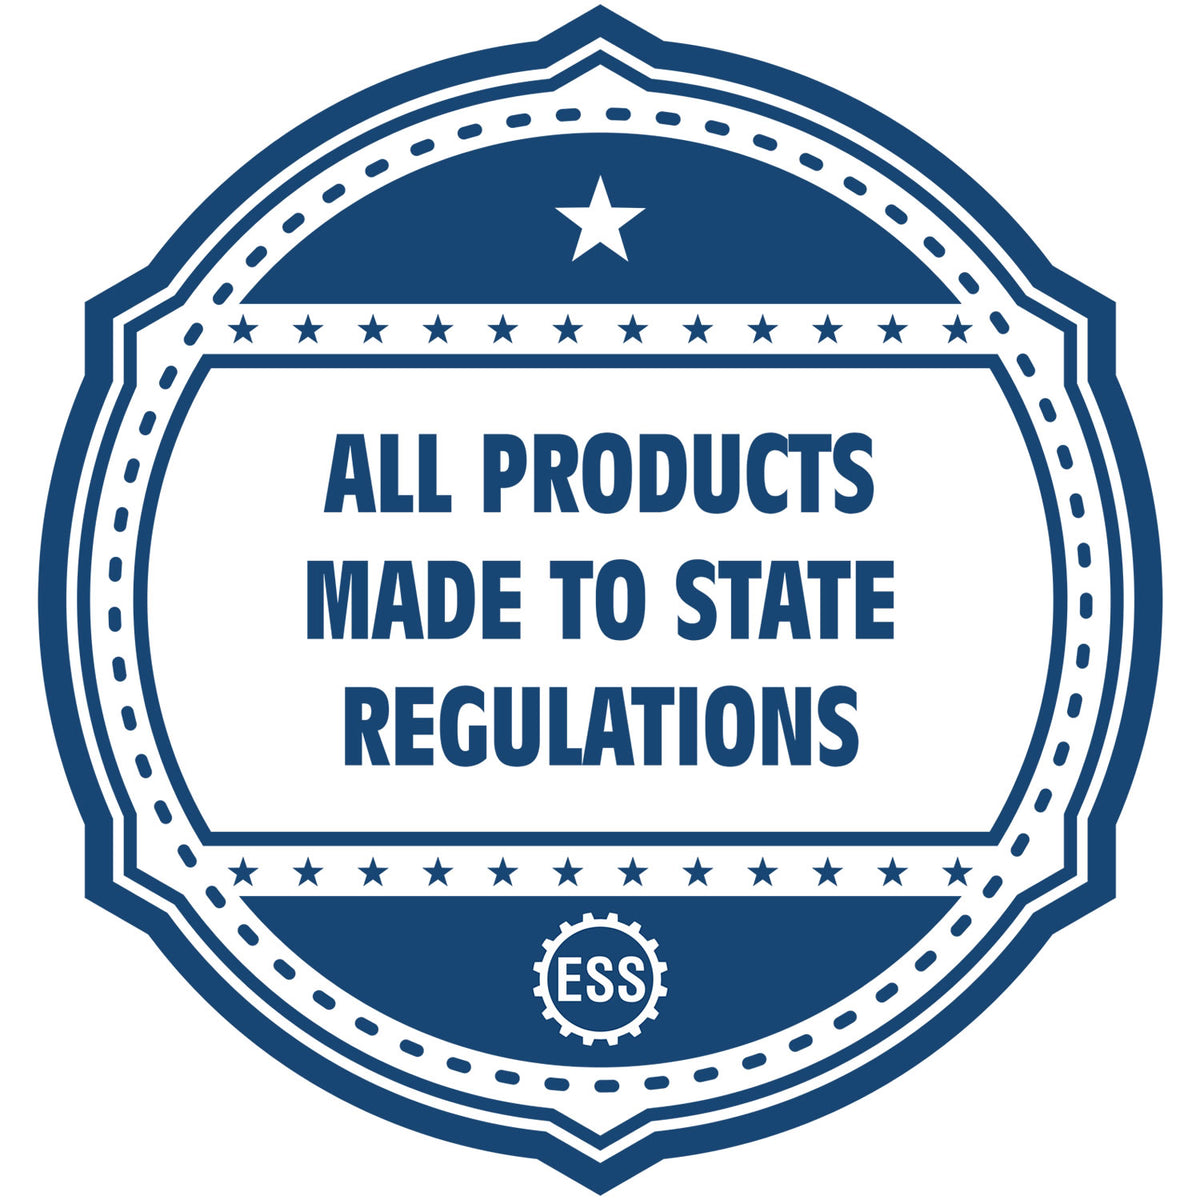 An icon or badge element for the State of Vermont Soft Land Surveyor Embossing Seal showing that this product is made in compliance with state regulations.